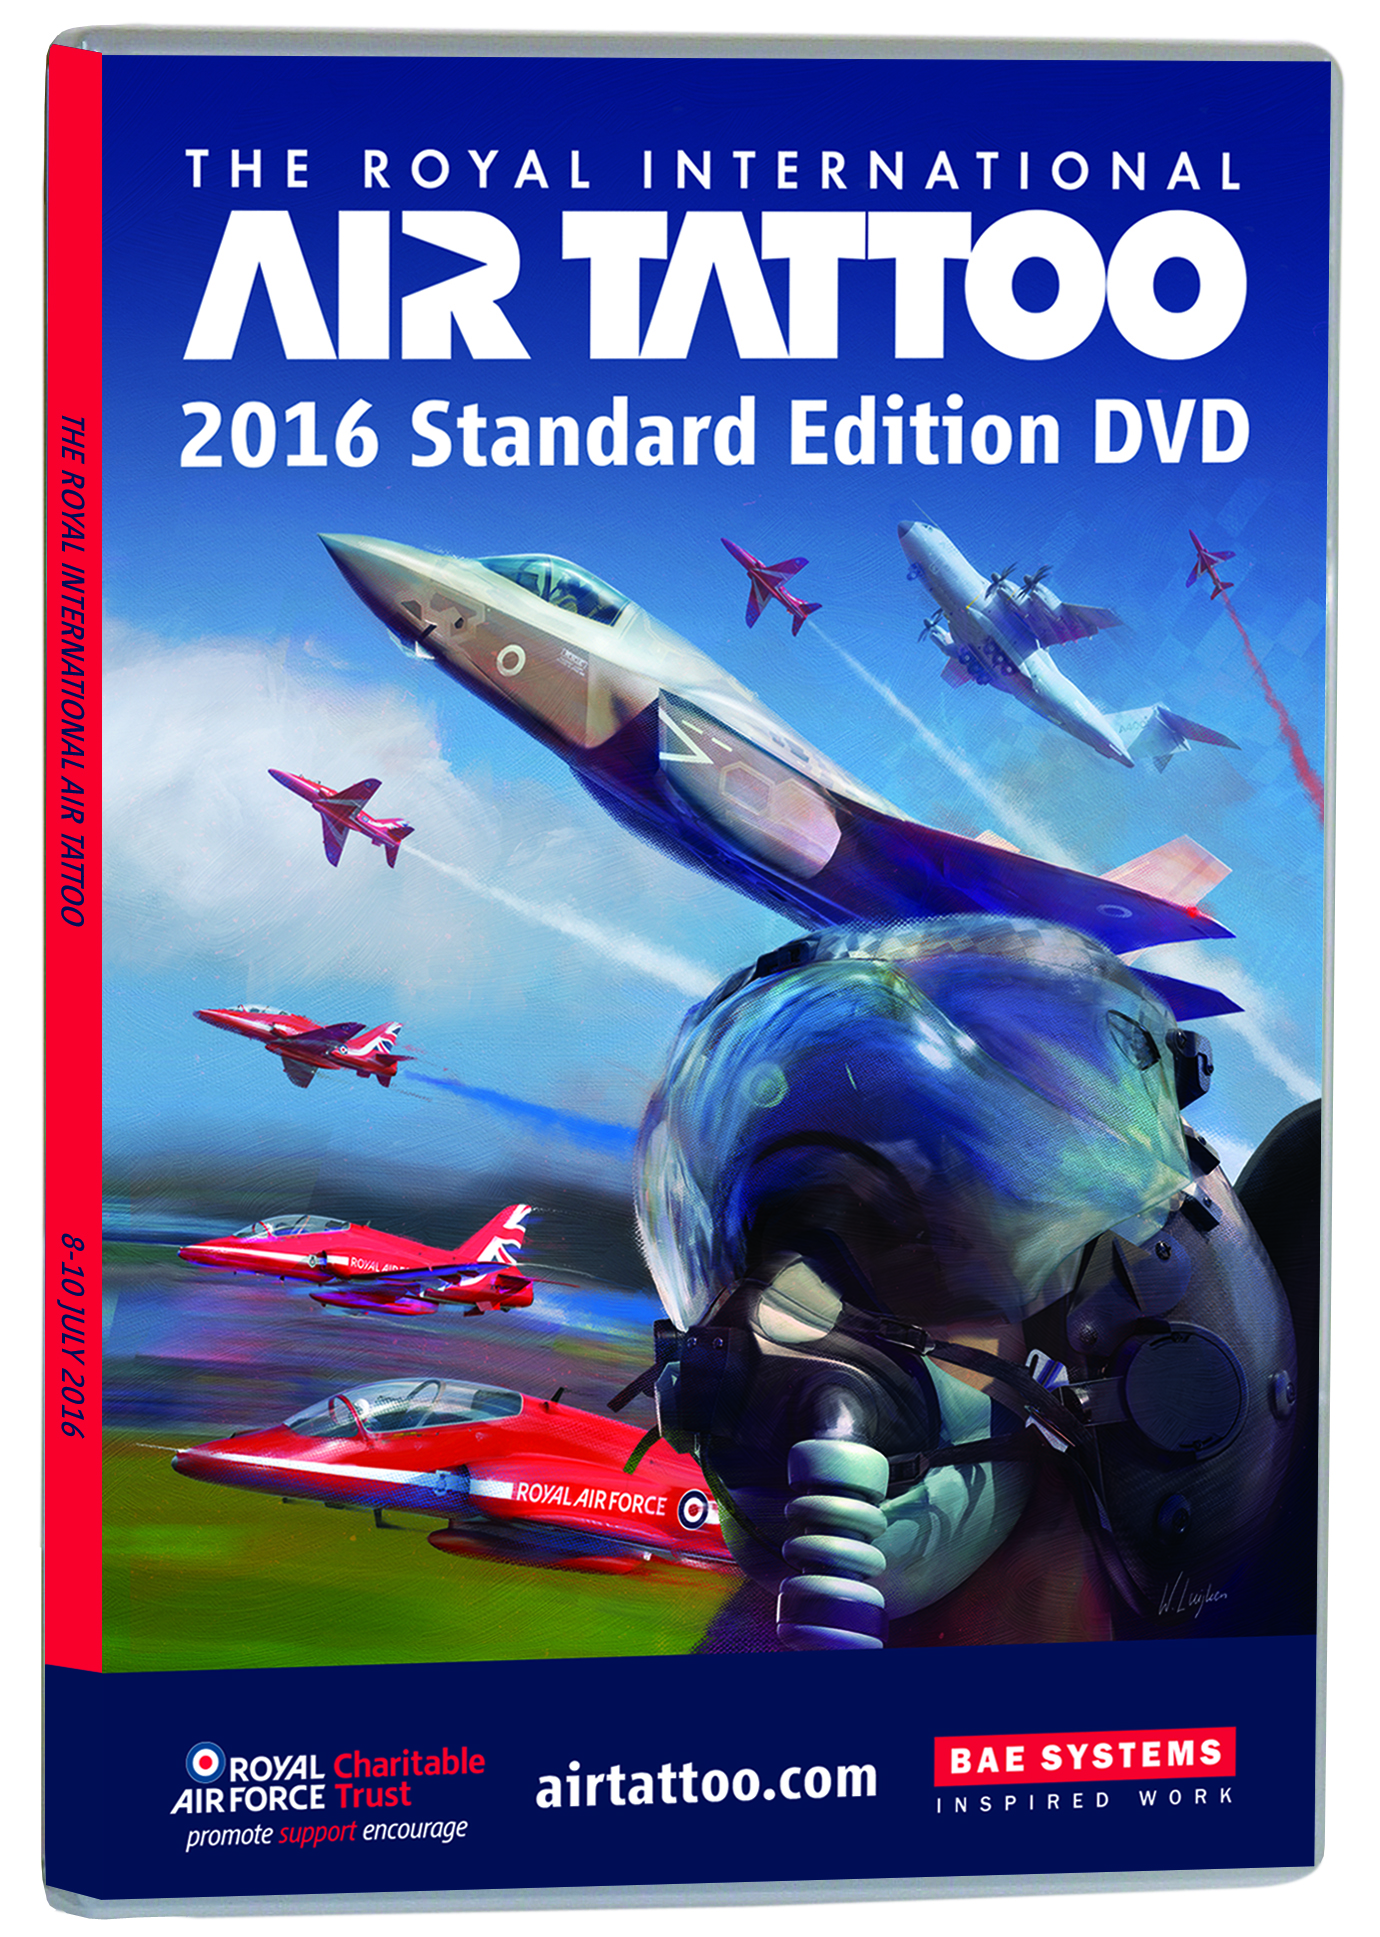 DVD/Blu-ray 2: Standard and Special Editions